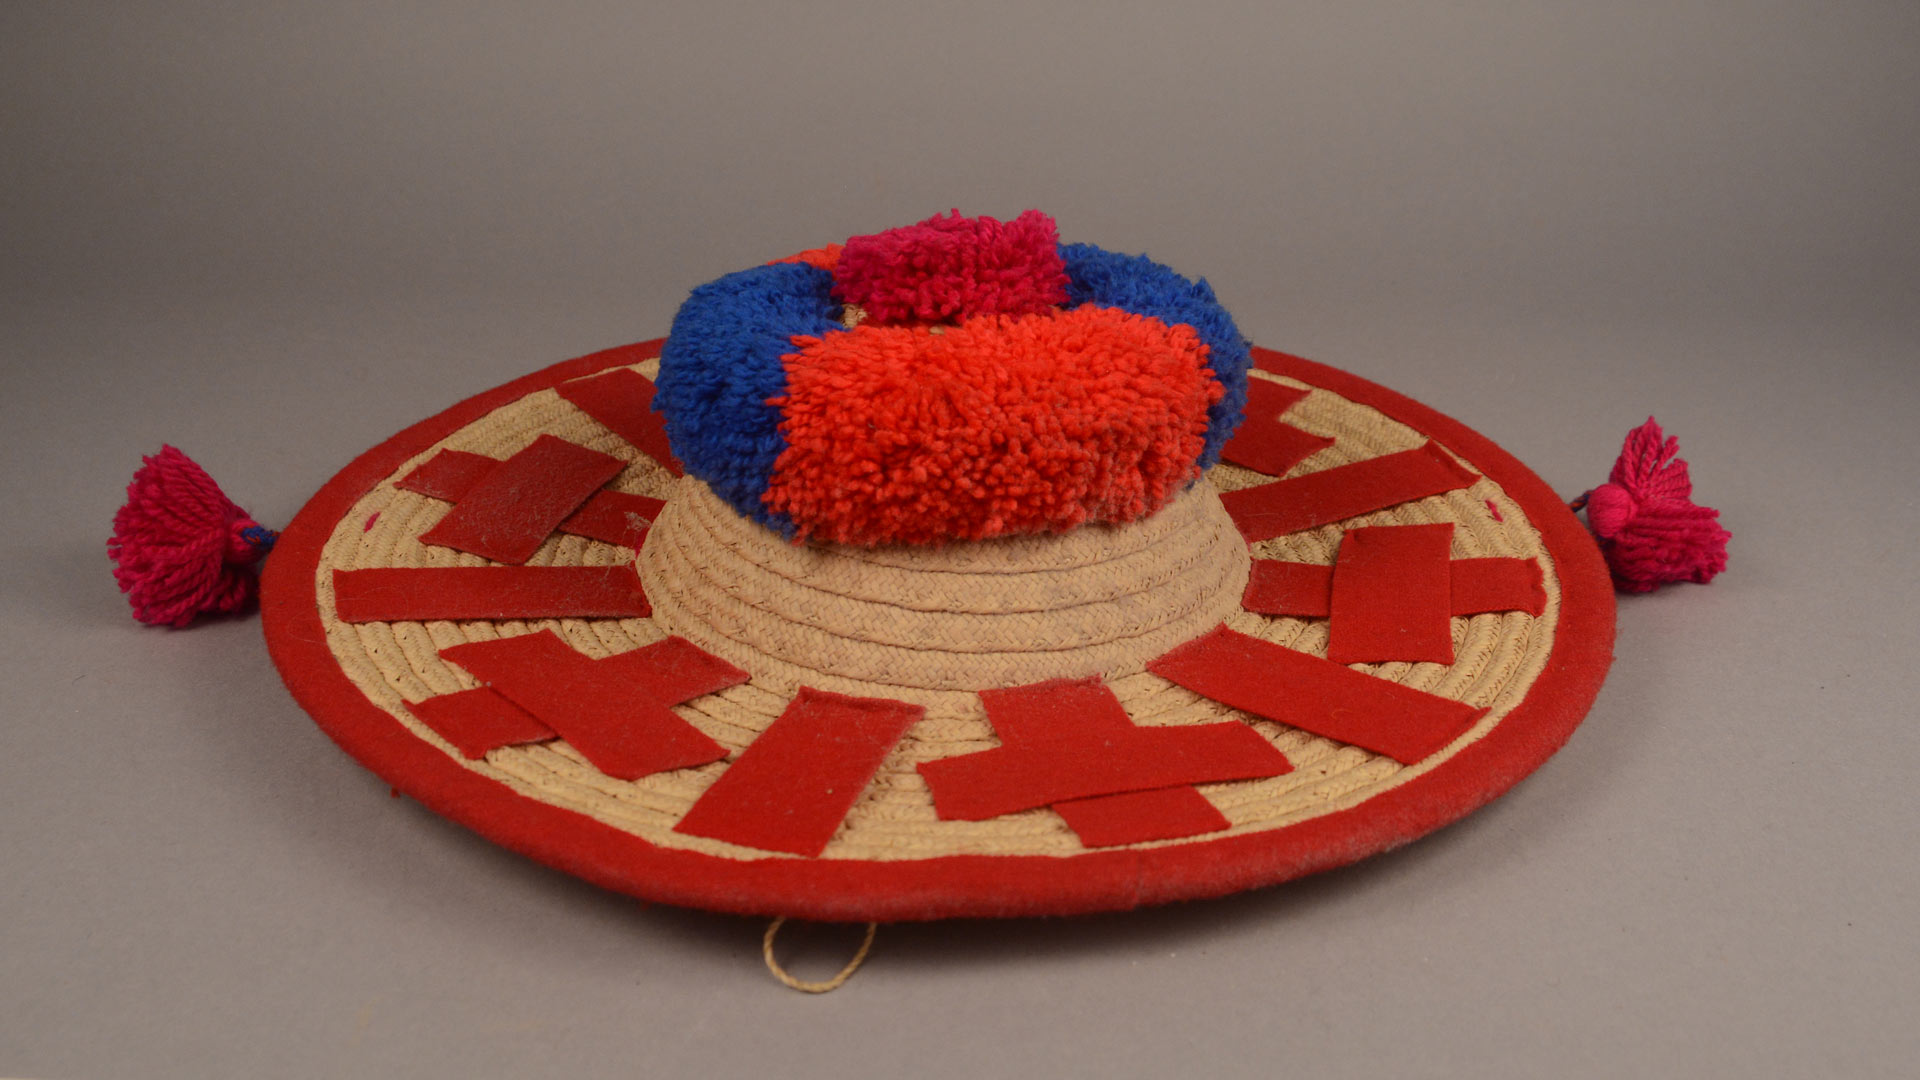 sombrero-style hat with a red trim and red and blue puffs on the top